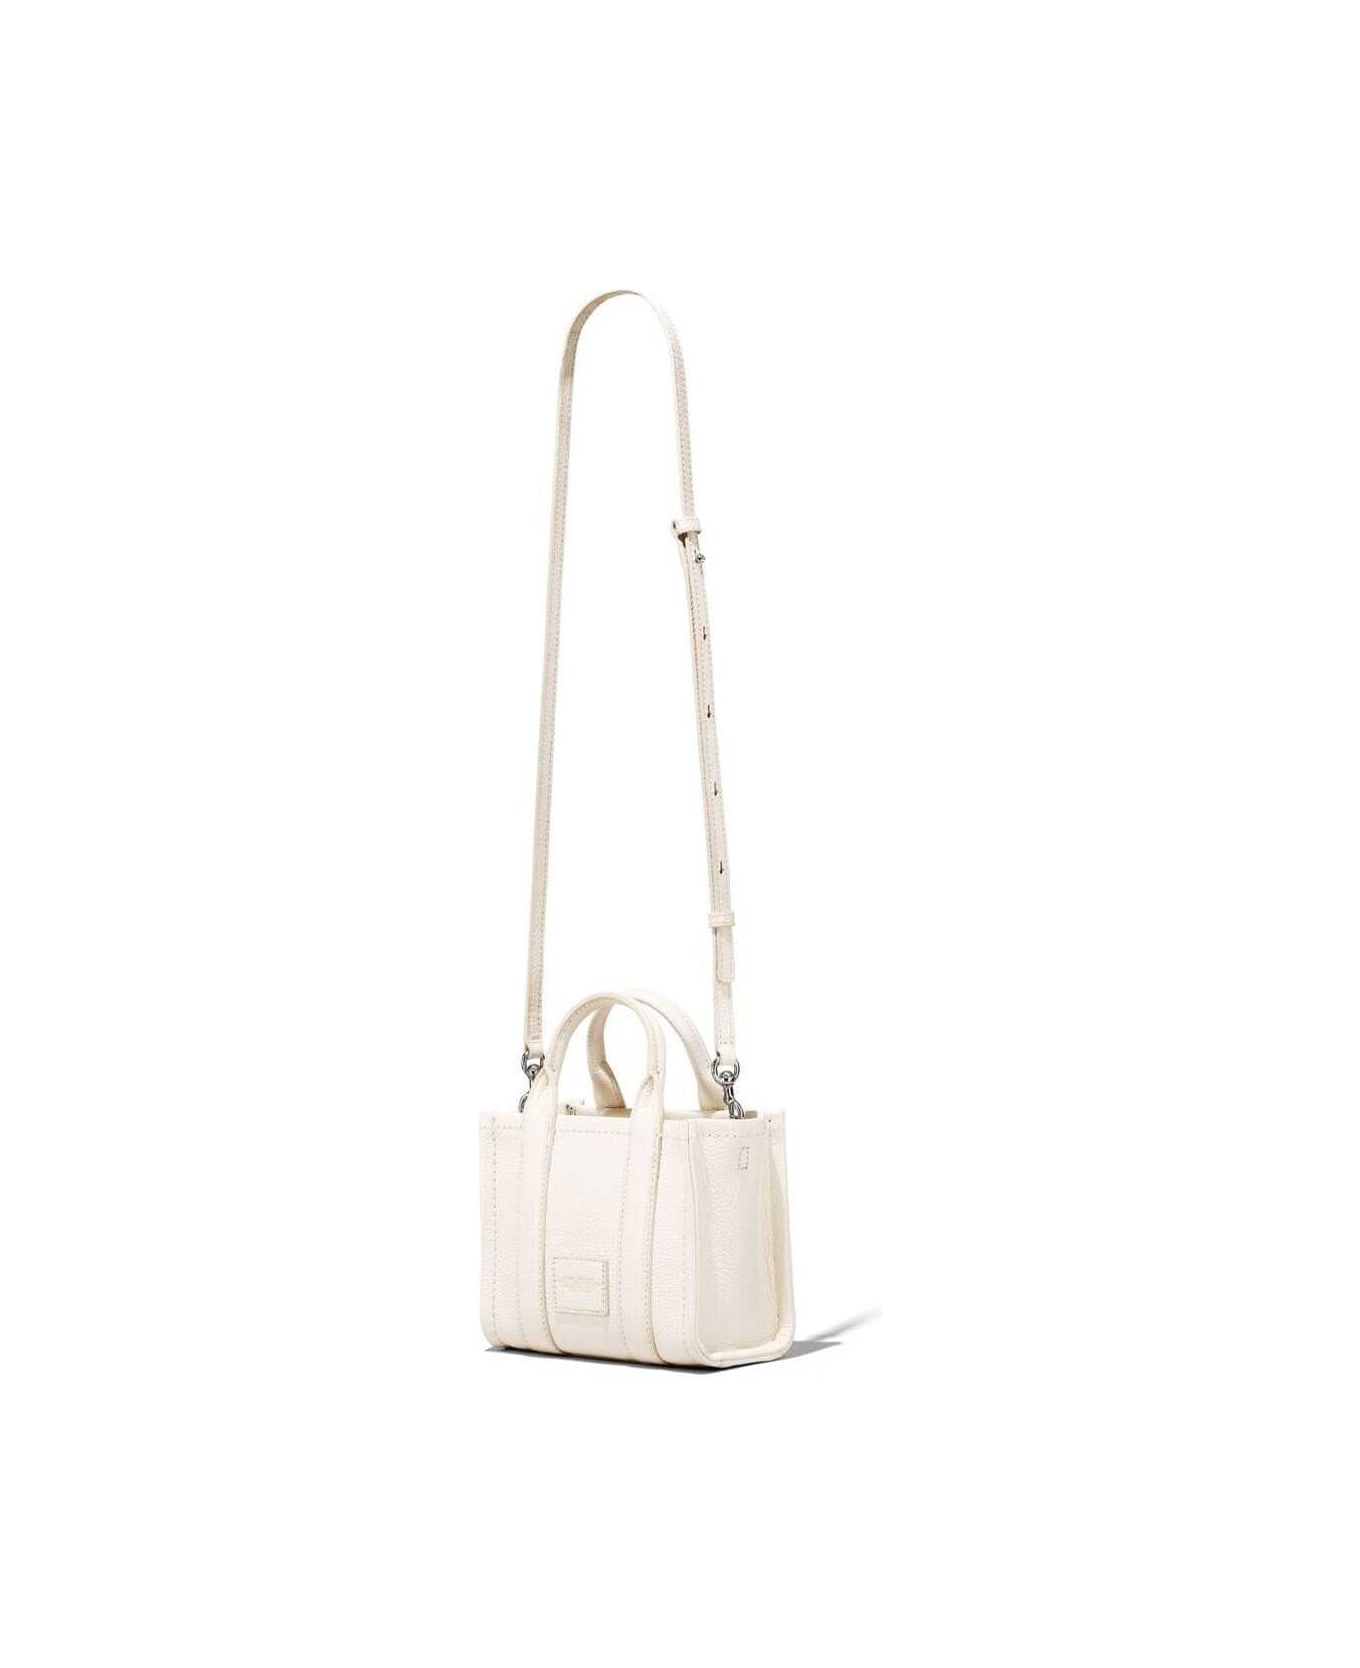 Marc Jacobs 'the Micro Tote Bag' White Shoulder Bag With Logo In Grainy Leather Woman - White